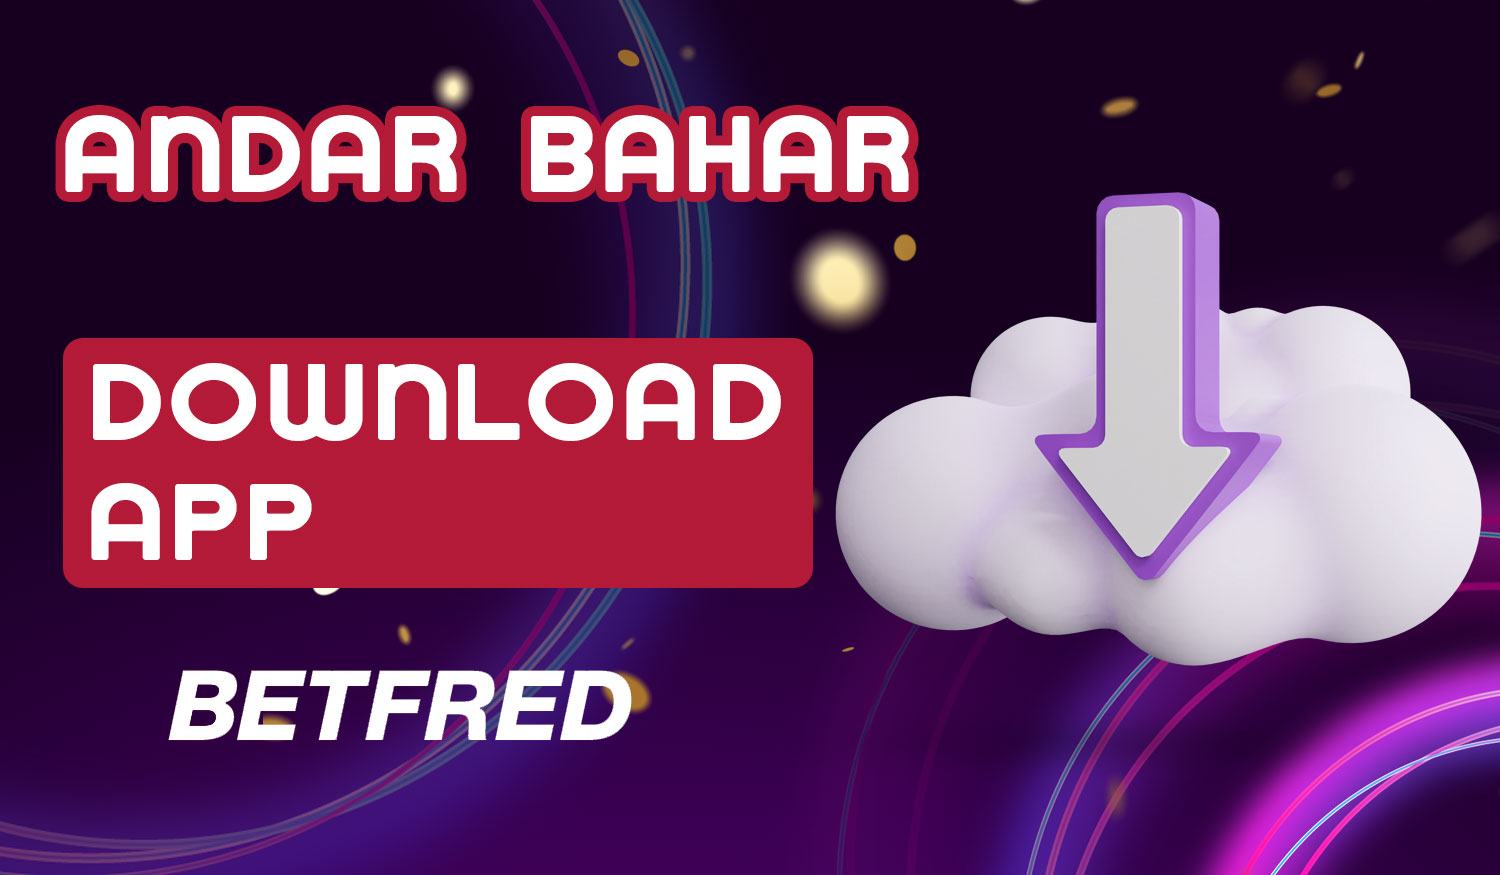 Detailed guide on how to download the Betfred mobile application in India on Android and iOS for playing Andar Bahar